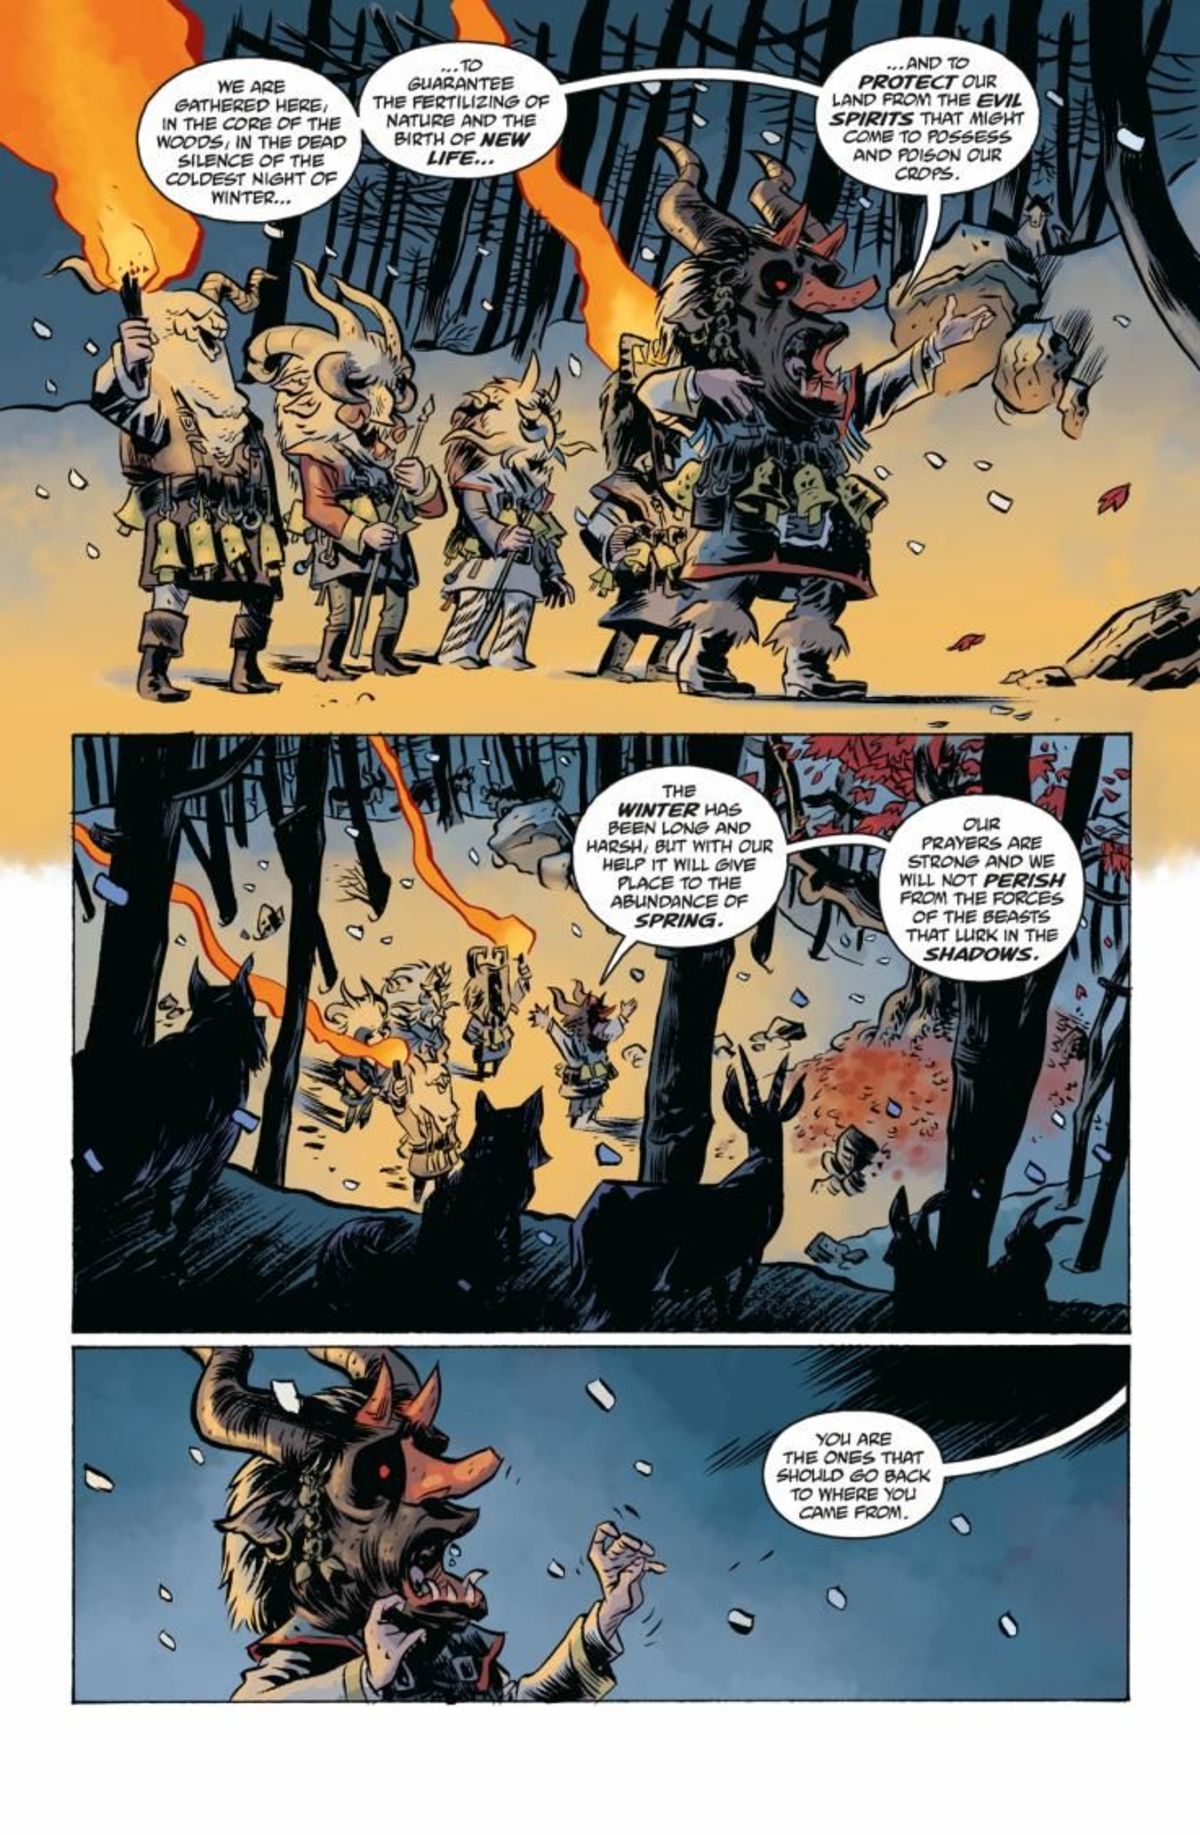 Exclusive Preview A New Year S Eve Seance Goes Bad In New Hellboy